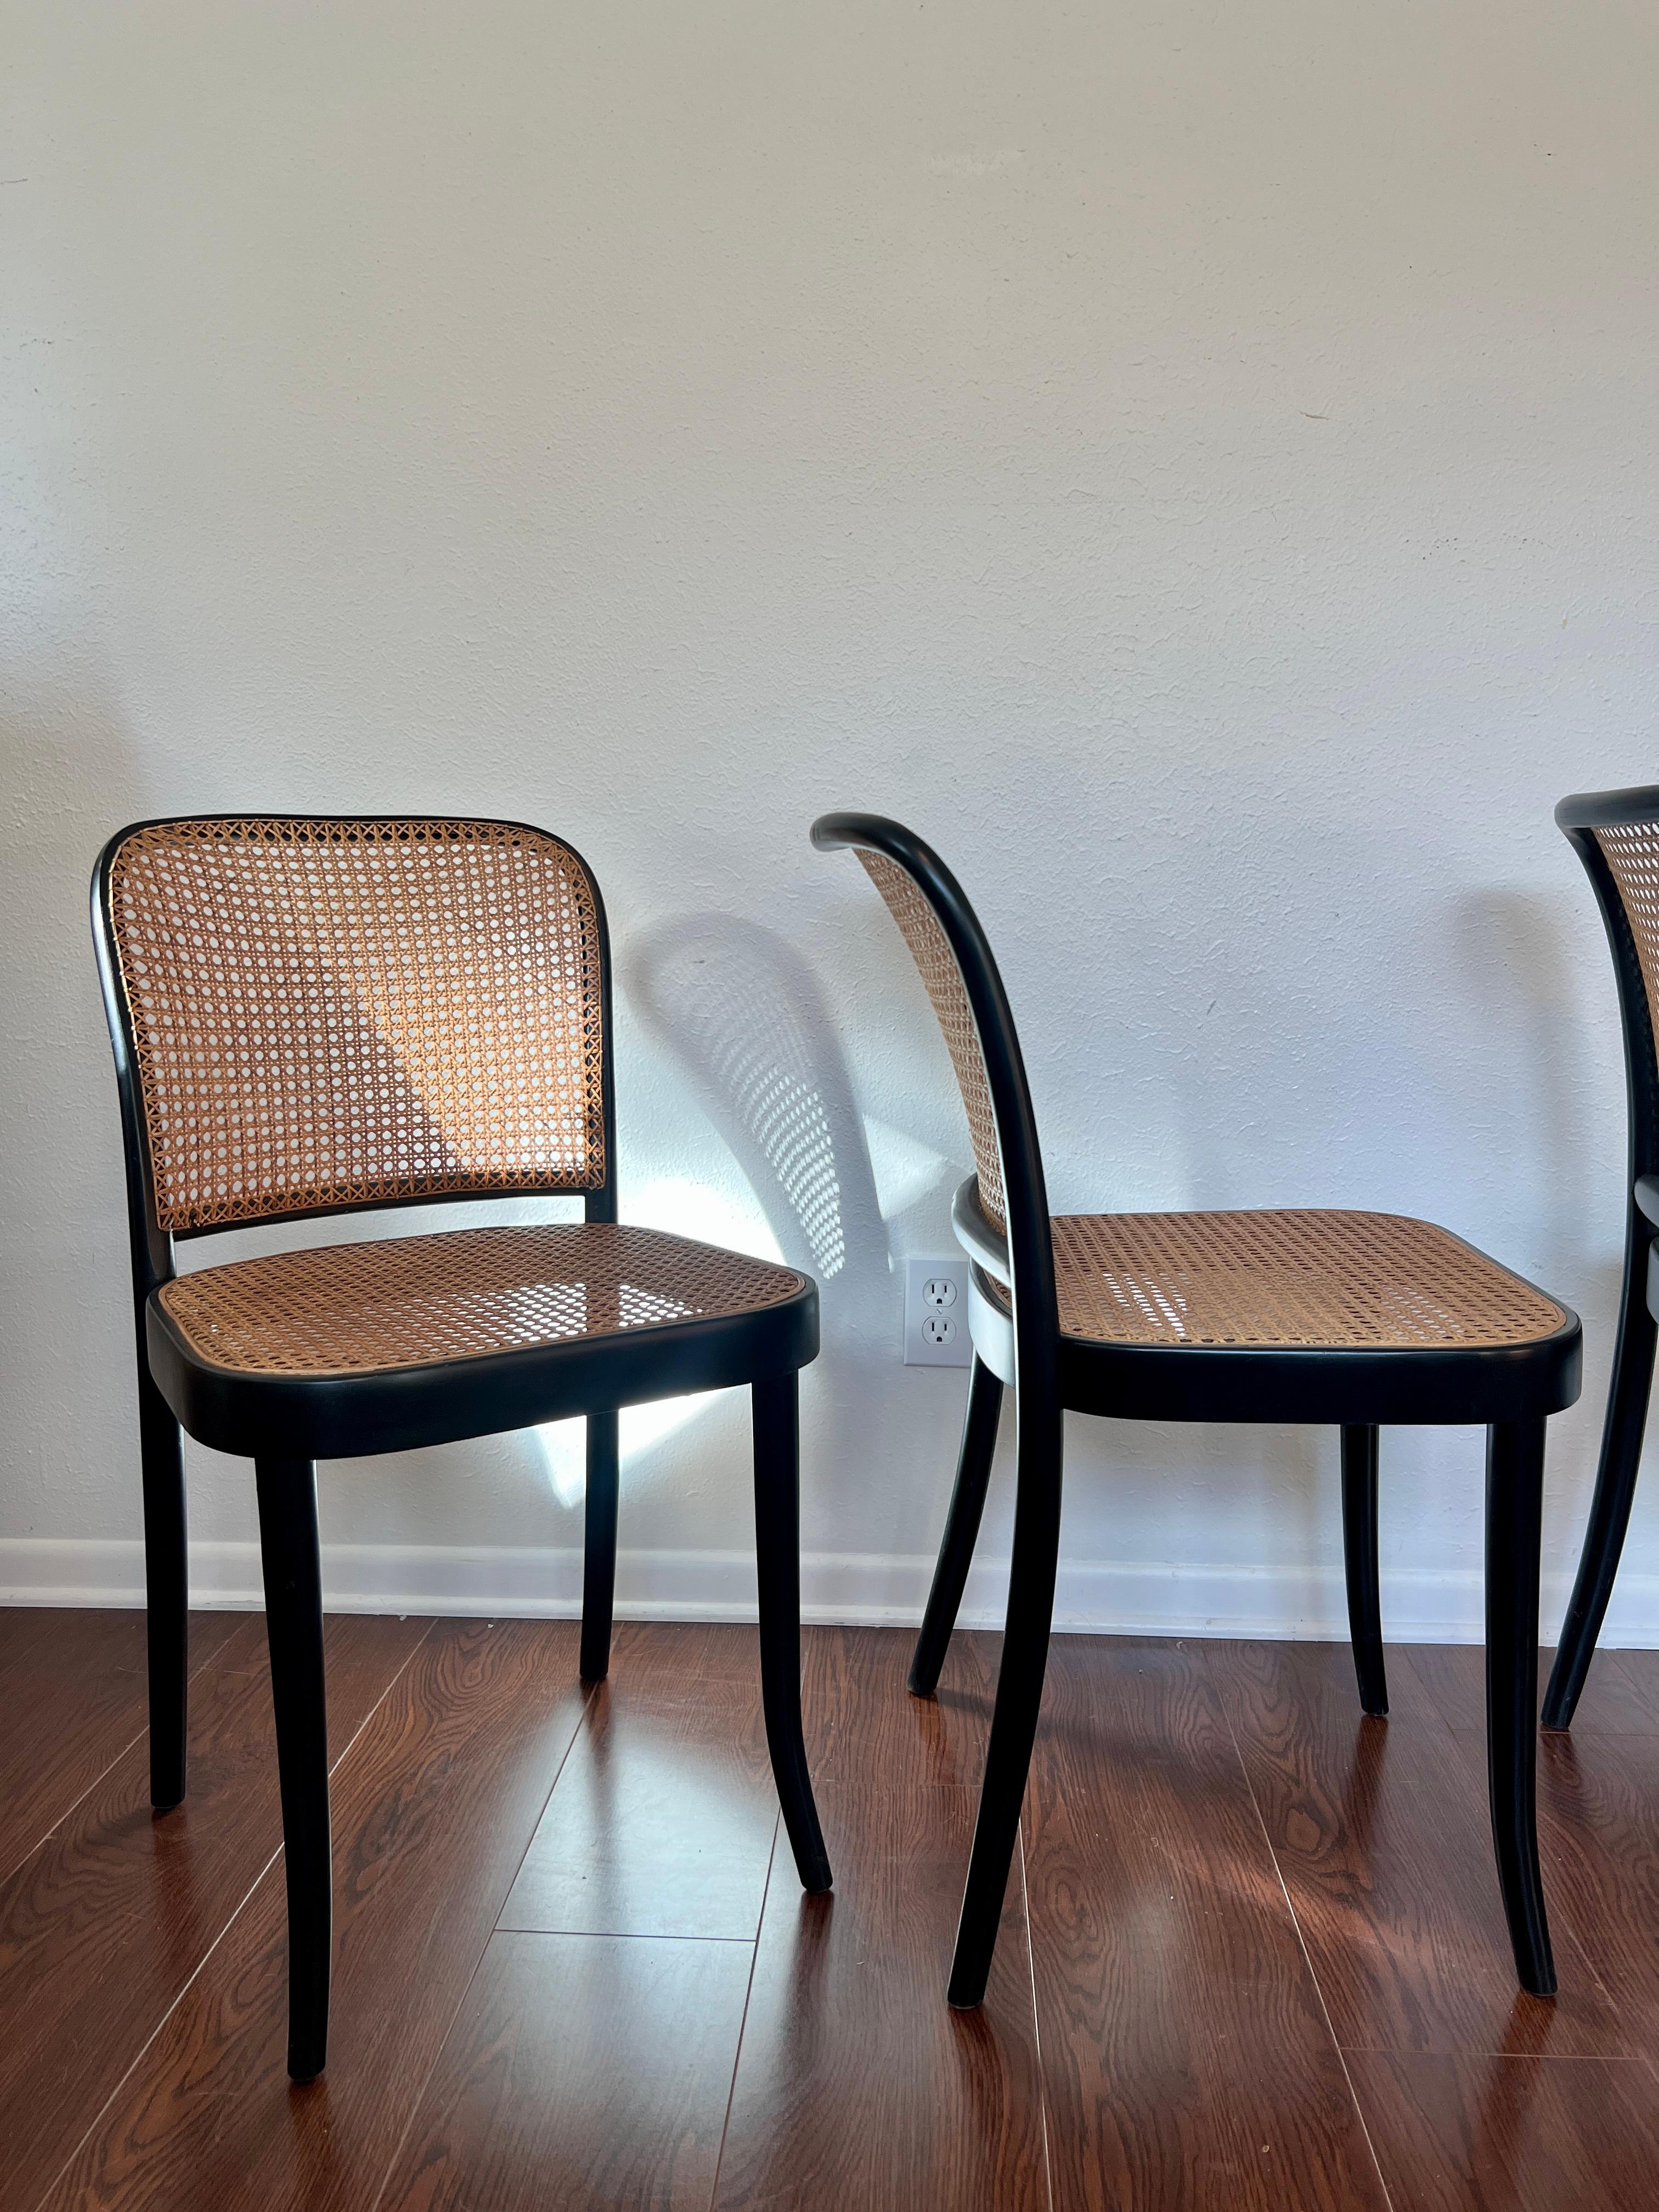 A set of of 4 original chairs by Josef Hoffmann for Thonet, circa 1960s. Recently refurbished, the bentwood beech wood and cane back / seats are in excellent condition and chairs are structurally sound. Imported by Stendig, made in Czechoslovakia.